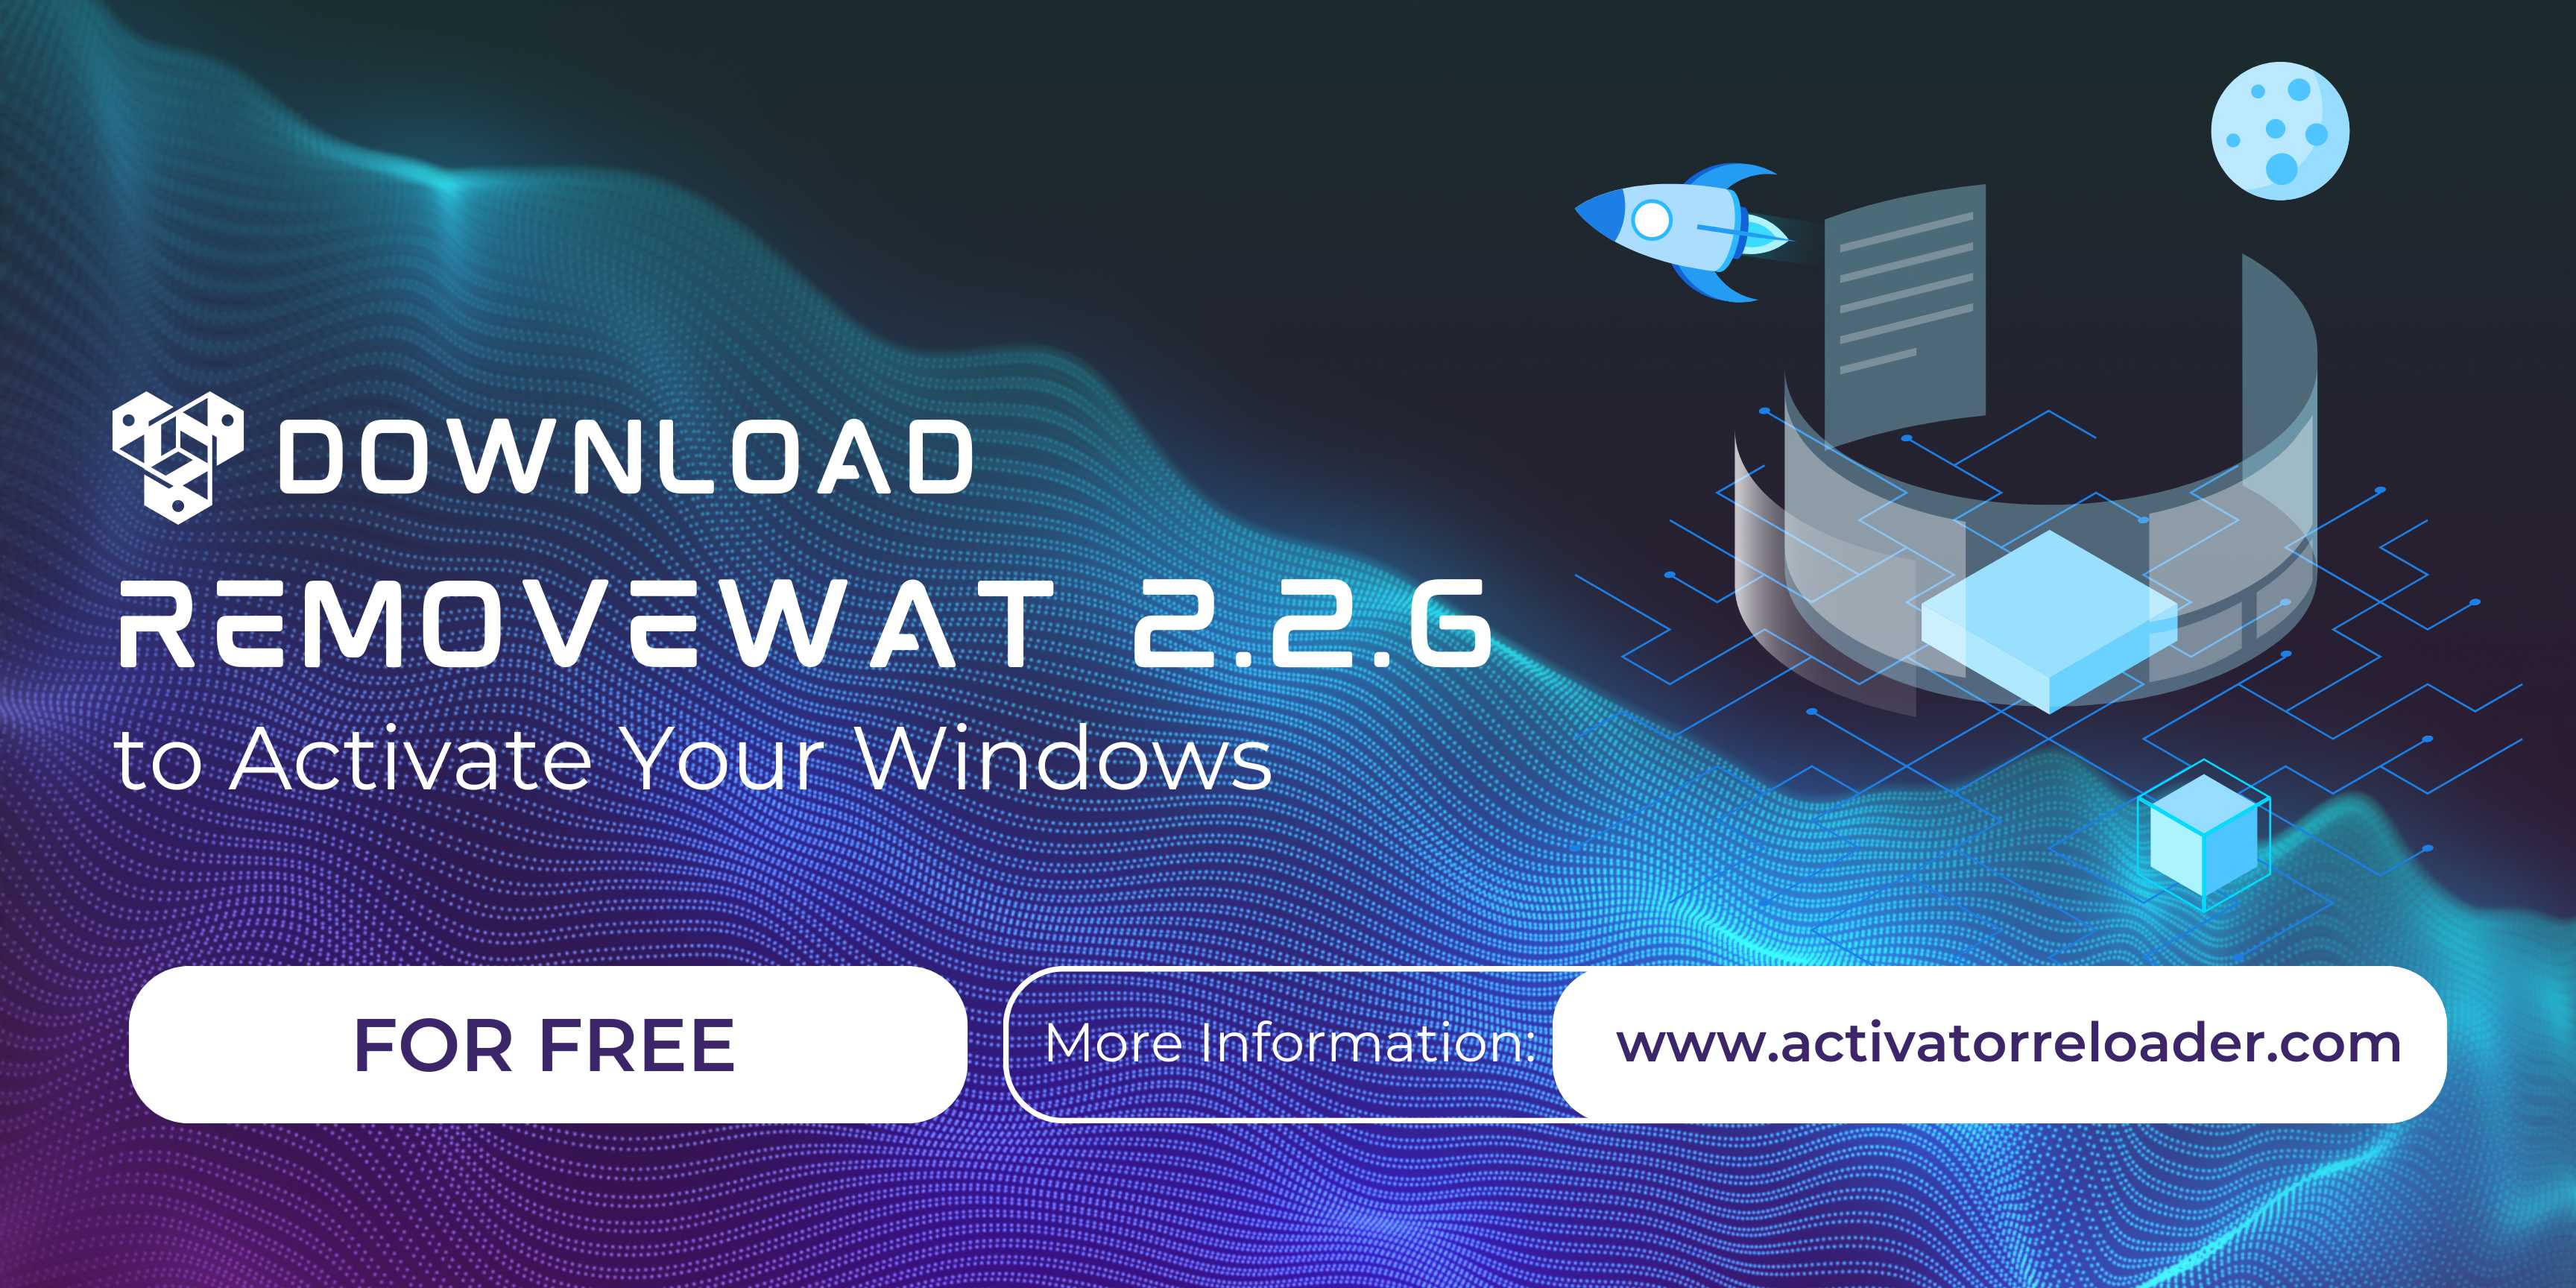 Download Removewat 2.2.6 to Activate Your Windows